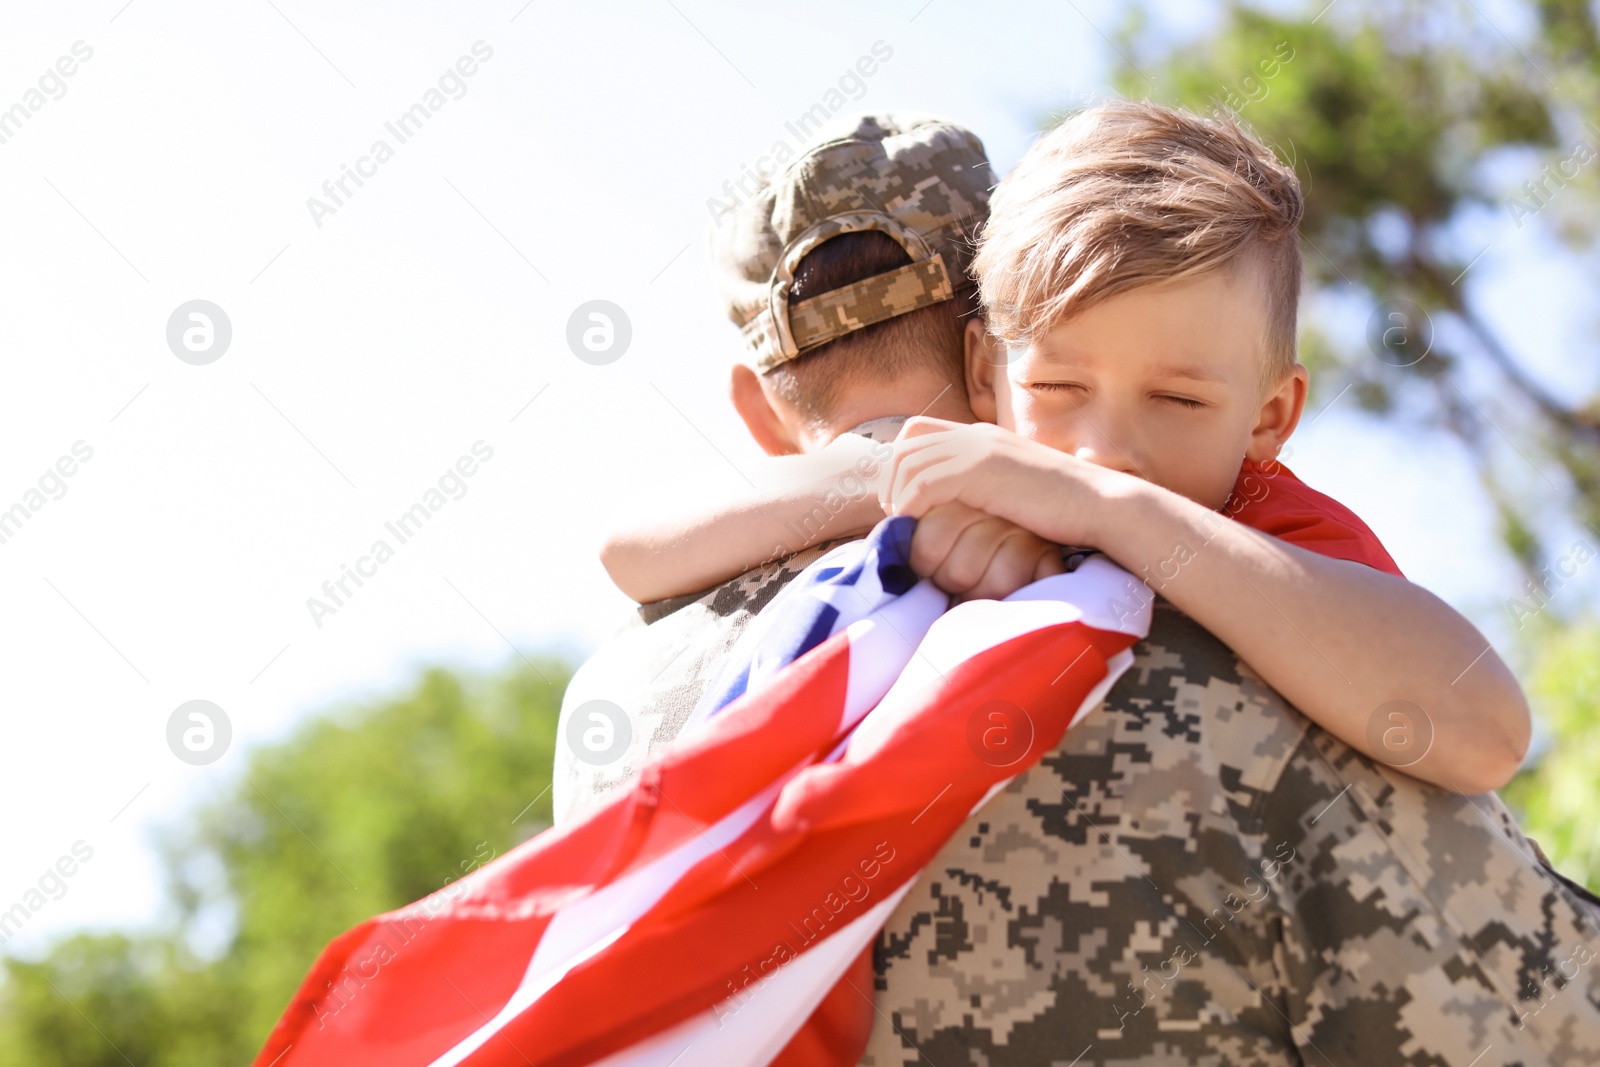 Photo of American soldier with his son outdoors. Military service